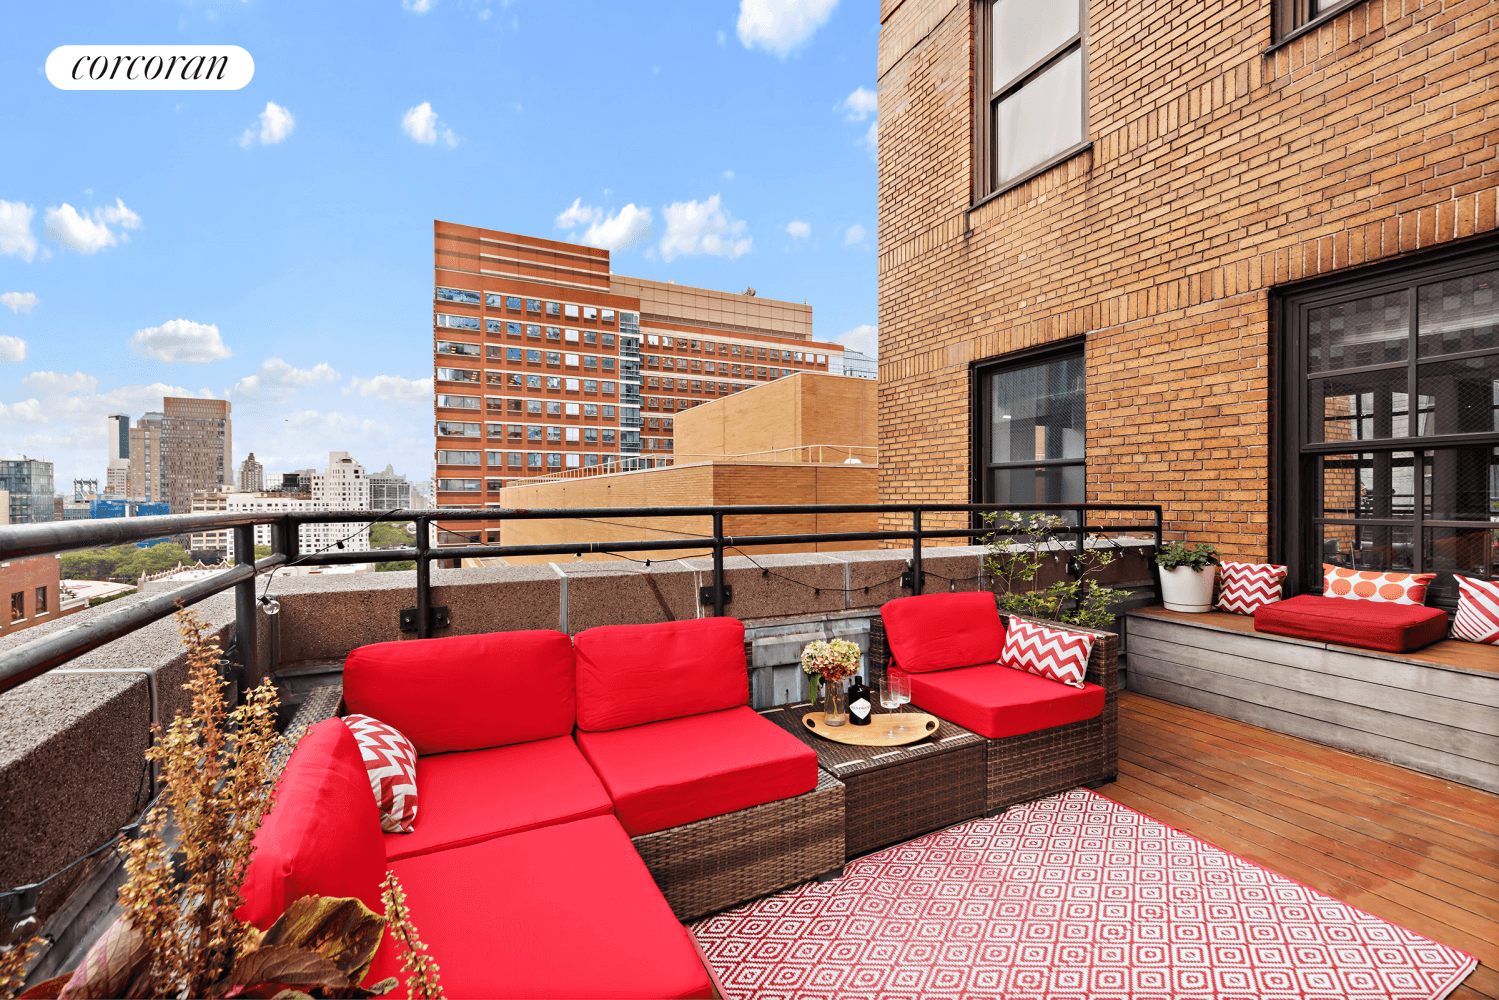 Welcome home to your renovated 1600 square foot corner loft paradise with a spectacular 400 square foot wrap around terrace facing tree tops and Manhattan.